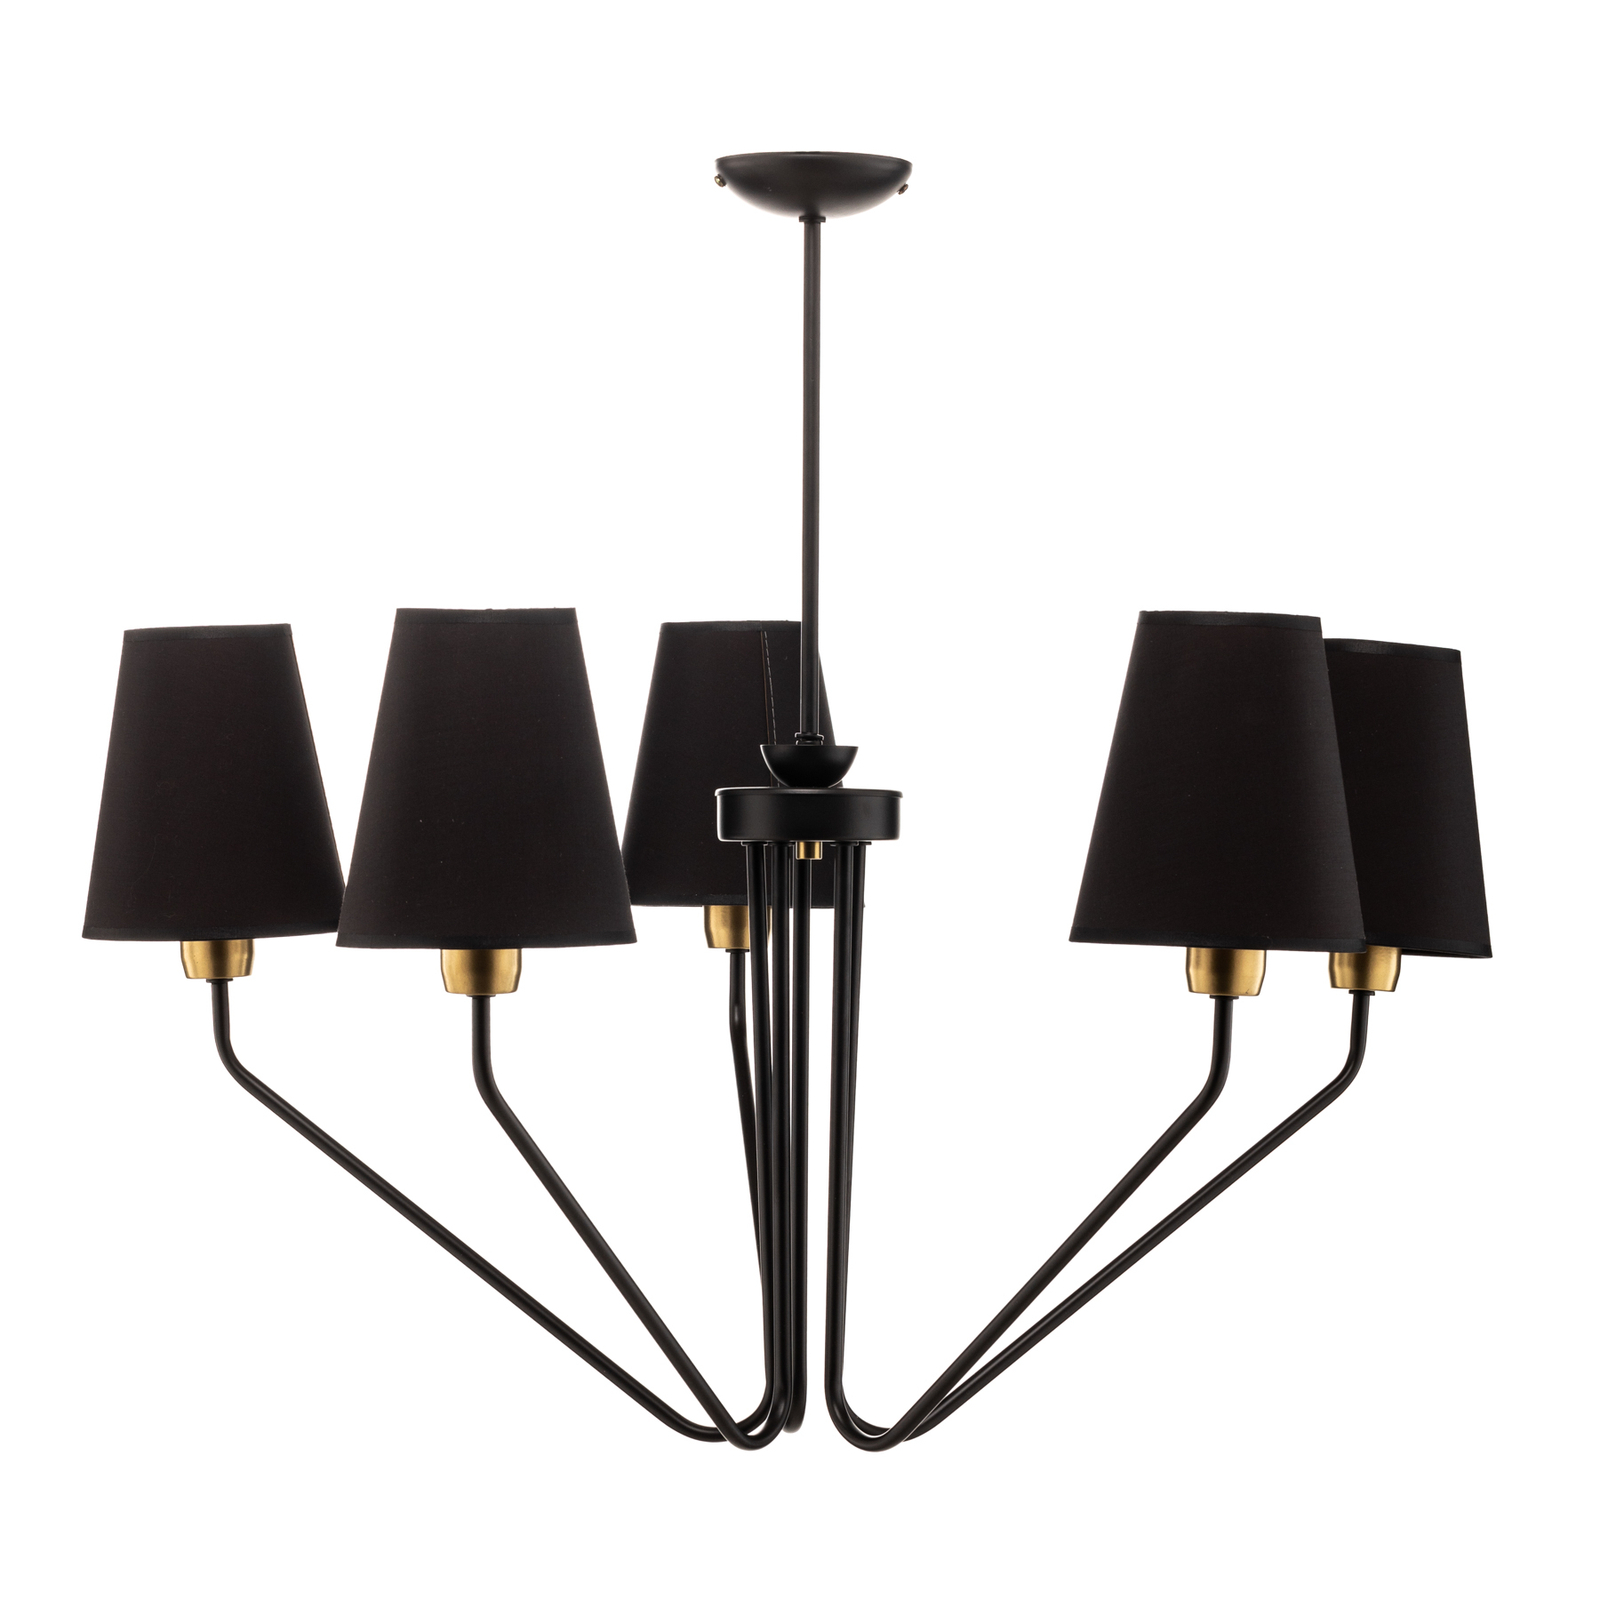 Victoria chandelier, fabric lampshades, black/gold